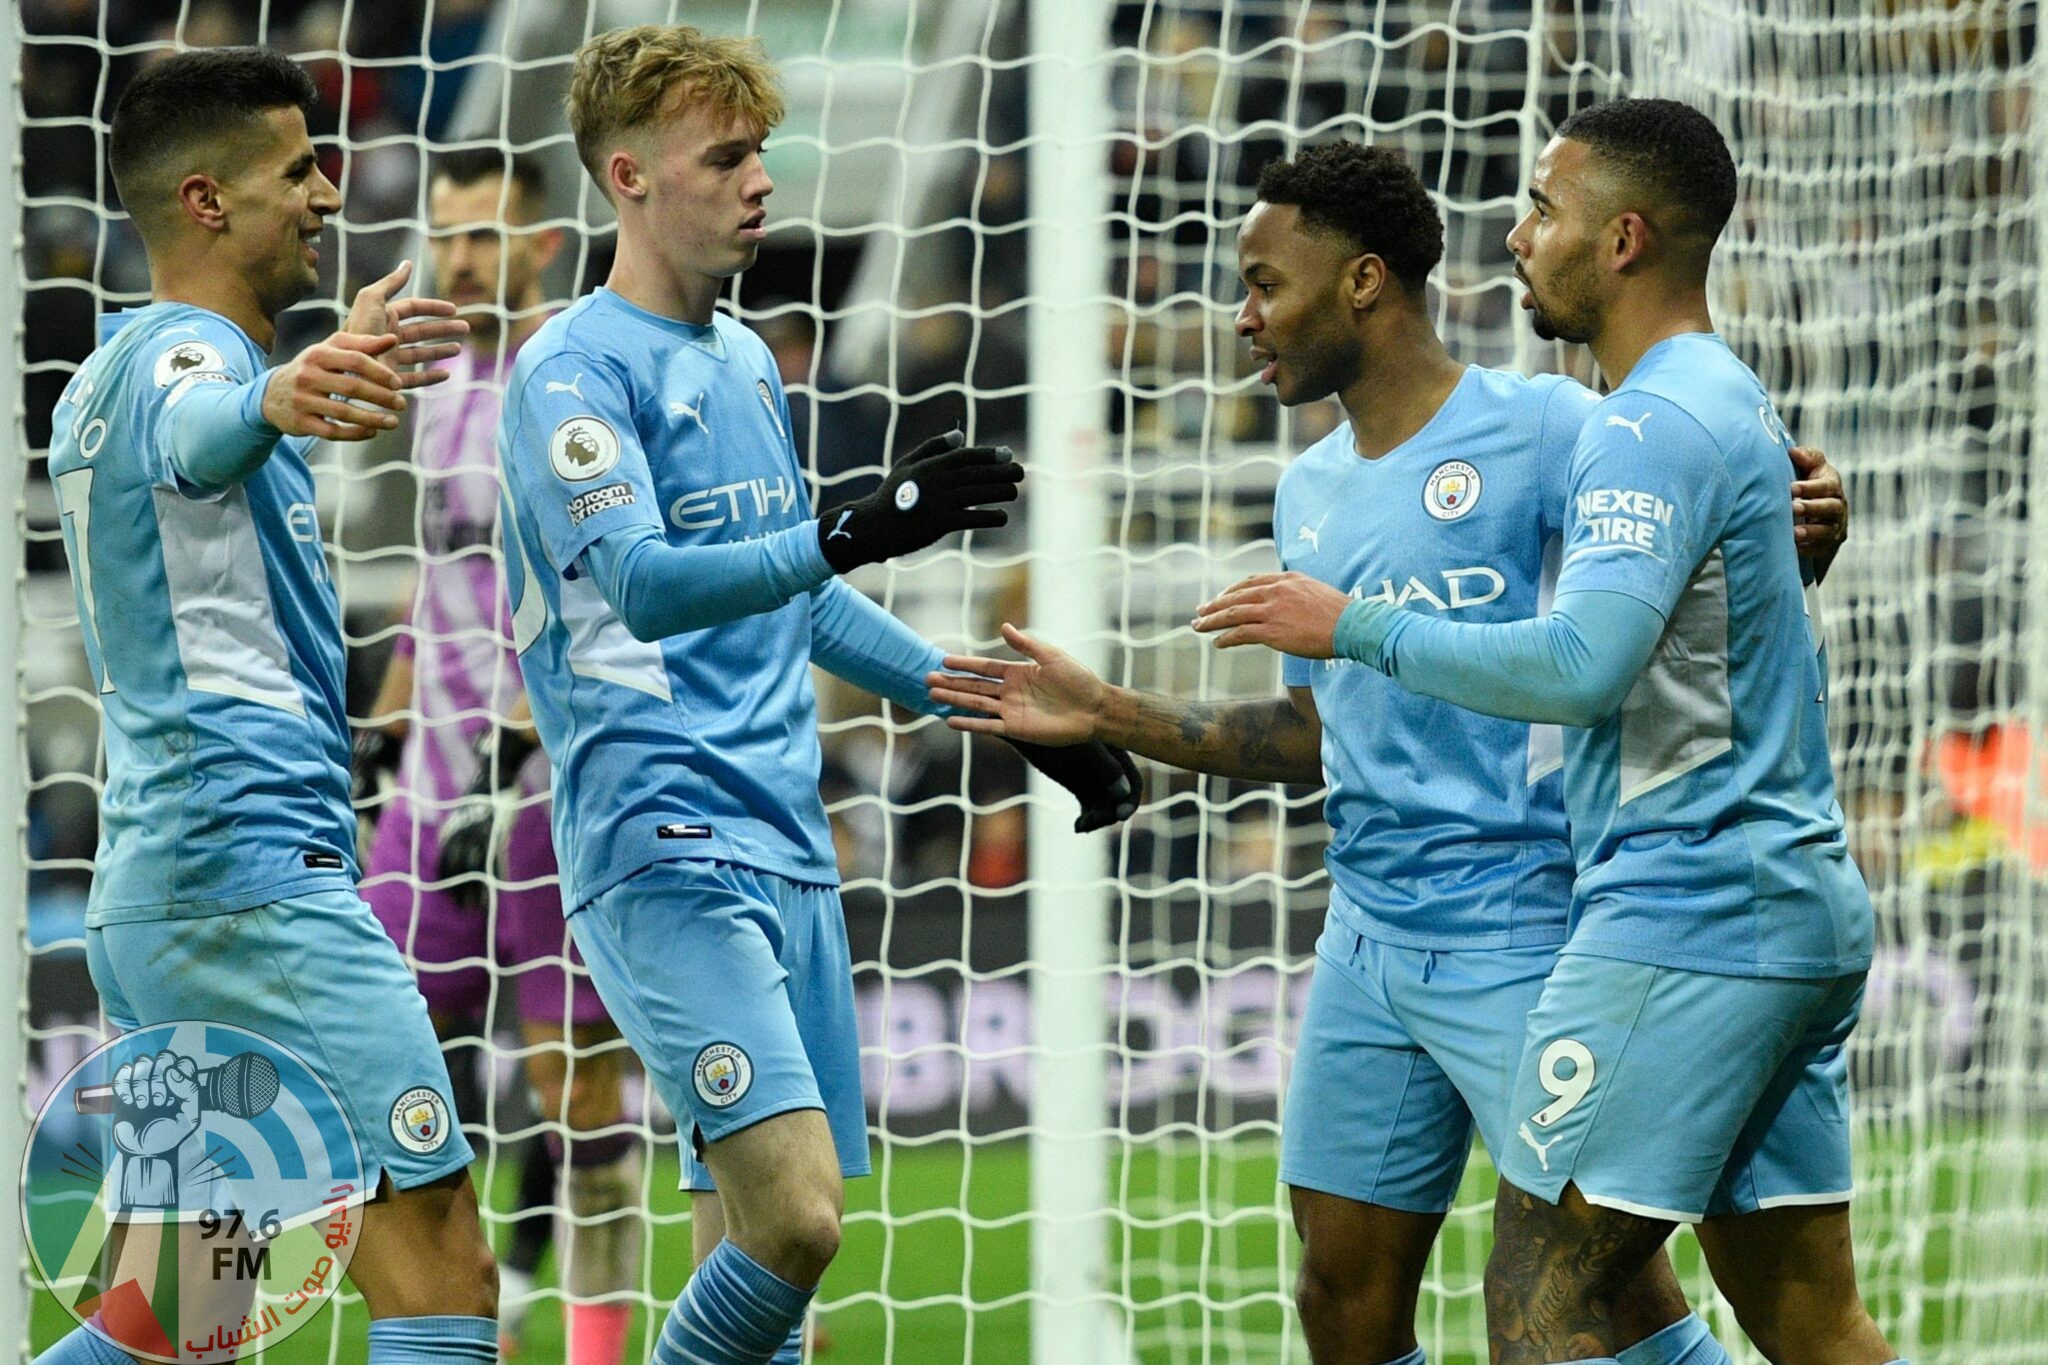 Manchester City's English midfielder Raheem Sterling (2nd R) celebrates with teammates after scoring their fourth goal during the English Premier League football match between Newcastle United and Manchester City at St James' Park in Newcastle-upon-Tyne, north east England on December 19, 2021. RESTRICTED TO EDITORIAL USE. No use with unauthorized audio, video, data, fixture lists, club/league logos or 'live' services. Online in-match use limited to 120 images. An additional 40 images may be used in extra time. No video emulation. Social media in-match use limited to 120 images. An additional 40 images may be used in extra time. No use in betting publications, games or single club/league/player publications. (Photo by Oli SCARFF / AFP) / RESTRICTED TO EDITORIAL USE. No use with unauthorized audio, video, data, fixture lists, club/league logos or 'live' services. Online in-match use limited to 120 images. An additional 40 images may be used in extra time. No video emulation. Social media in-match use limited to 120 images. An additional 40 images may be used in extra time. No use in betting publications, games or single club/league/player publications.